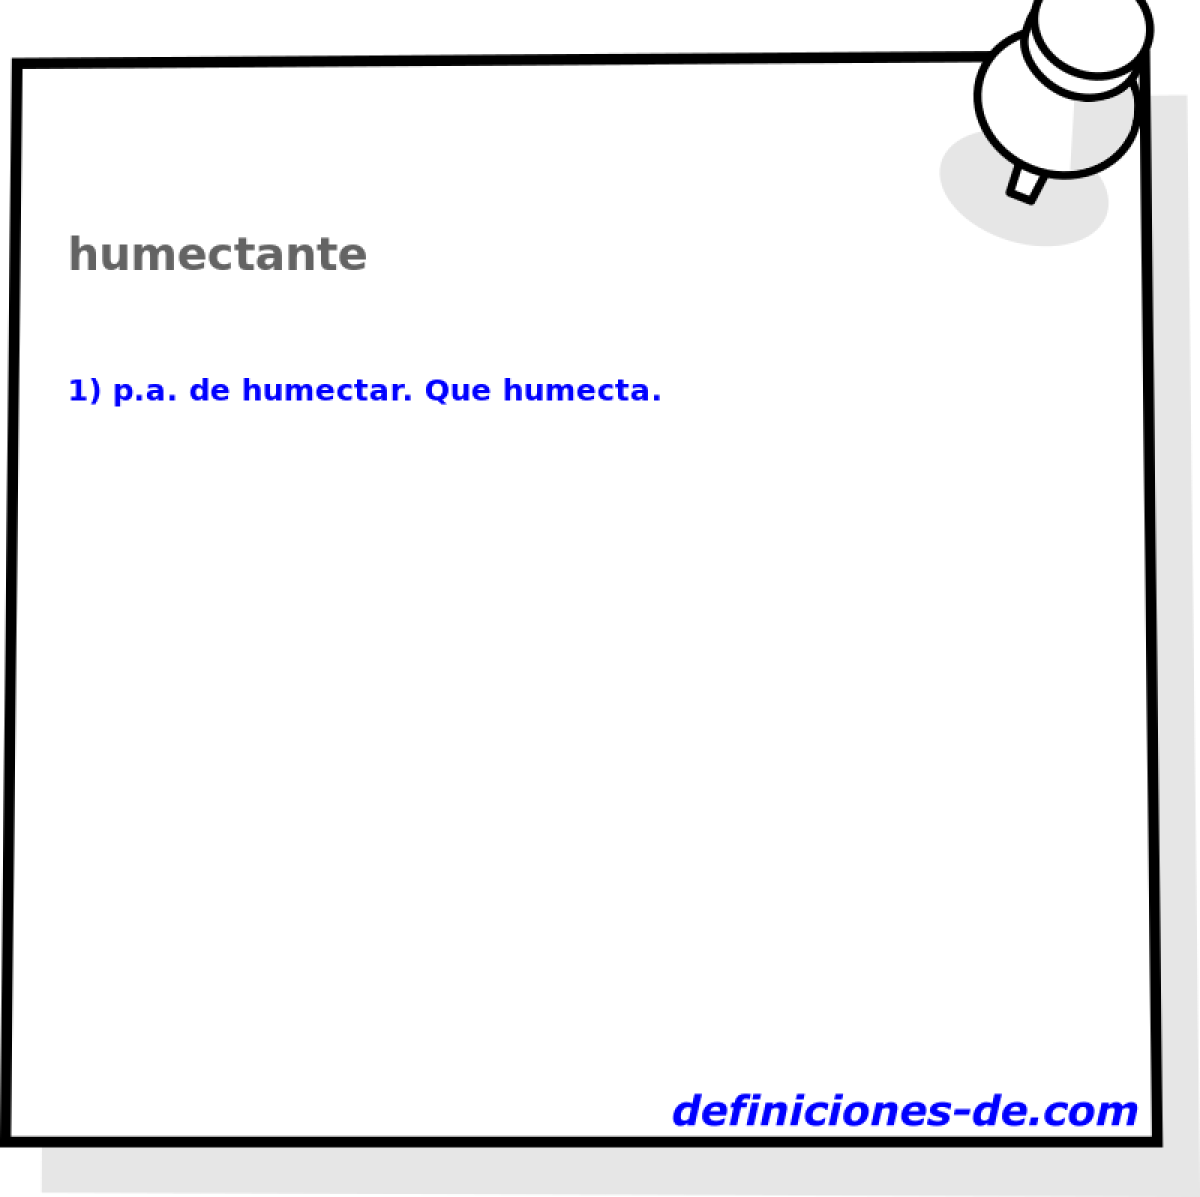 humectante 